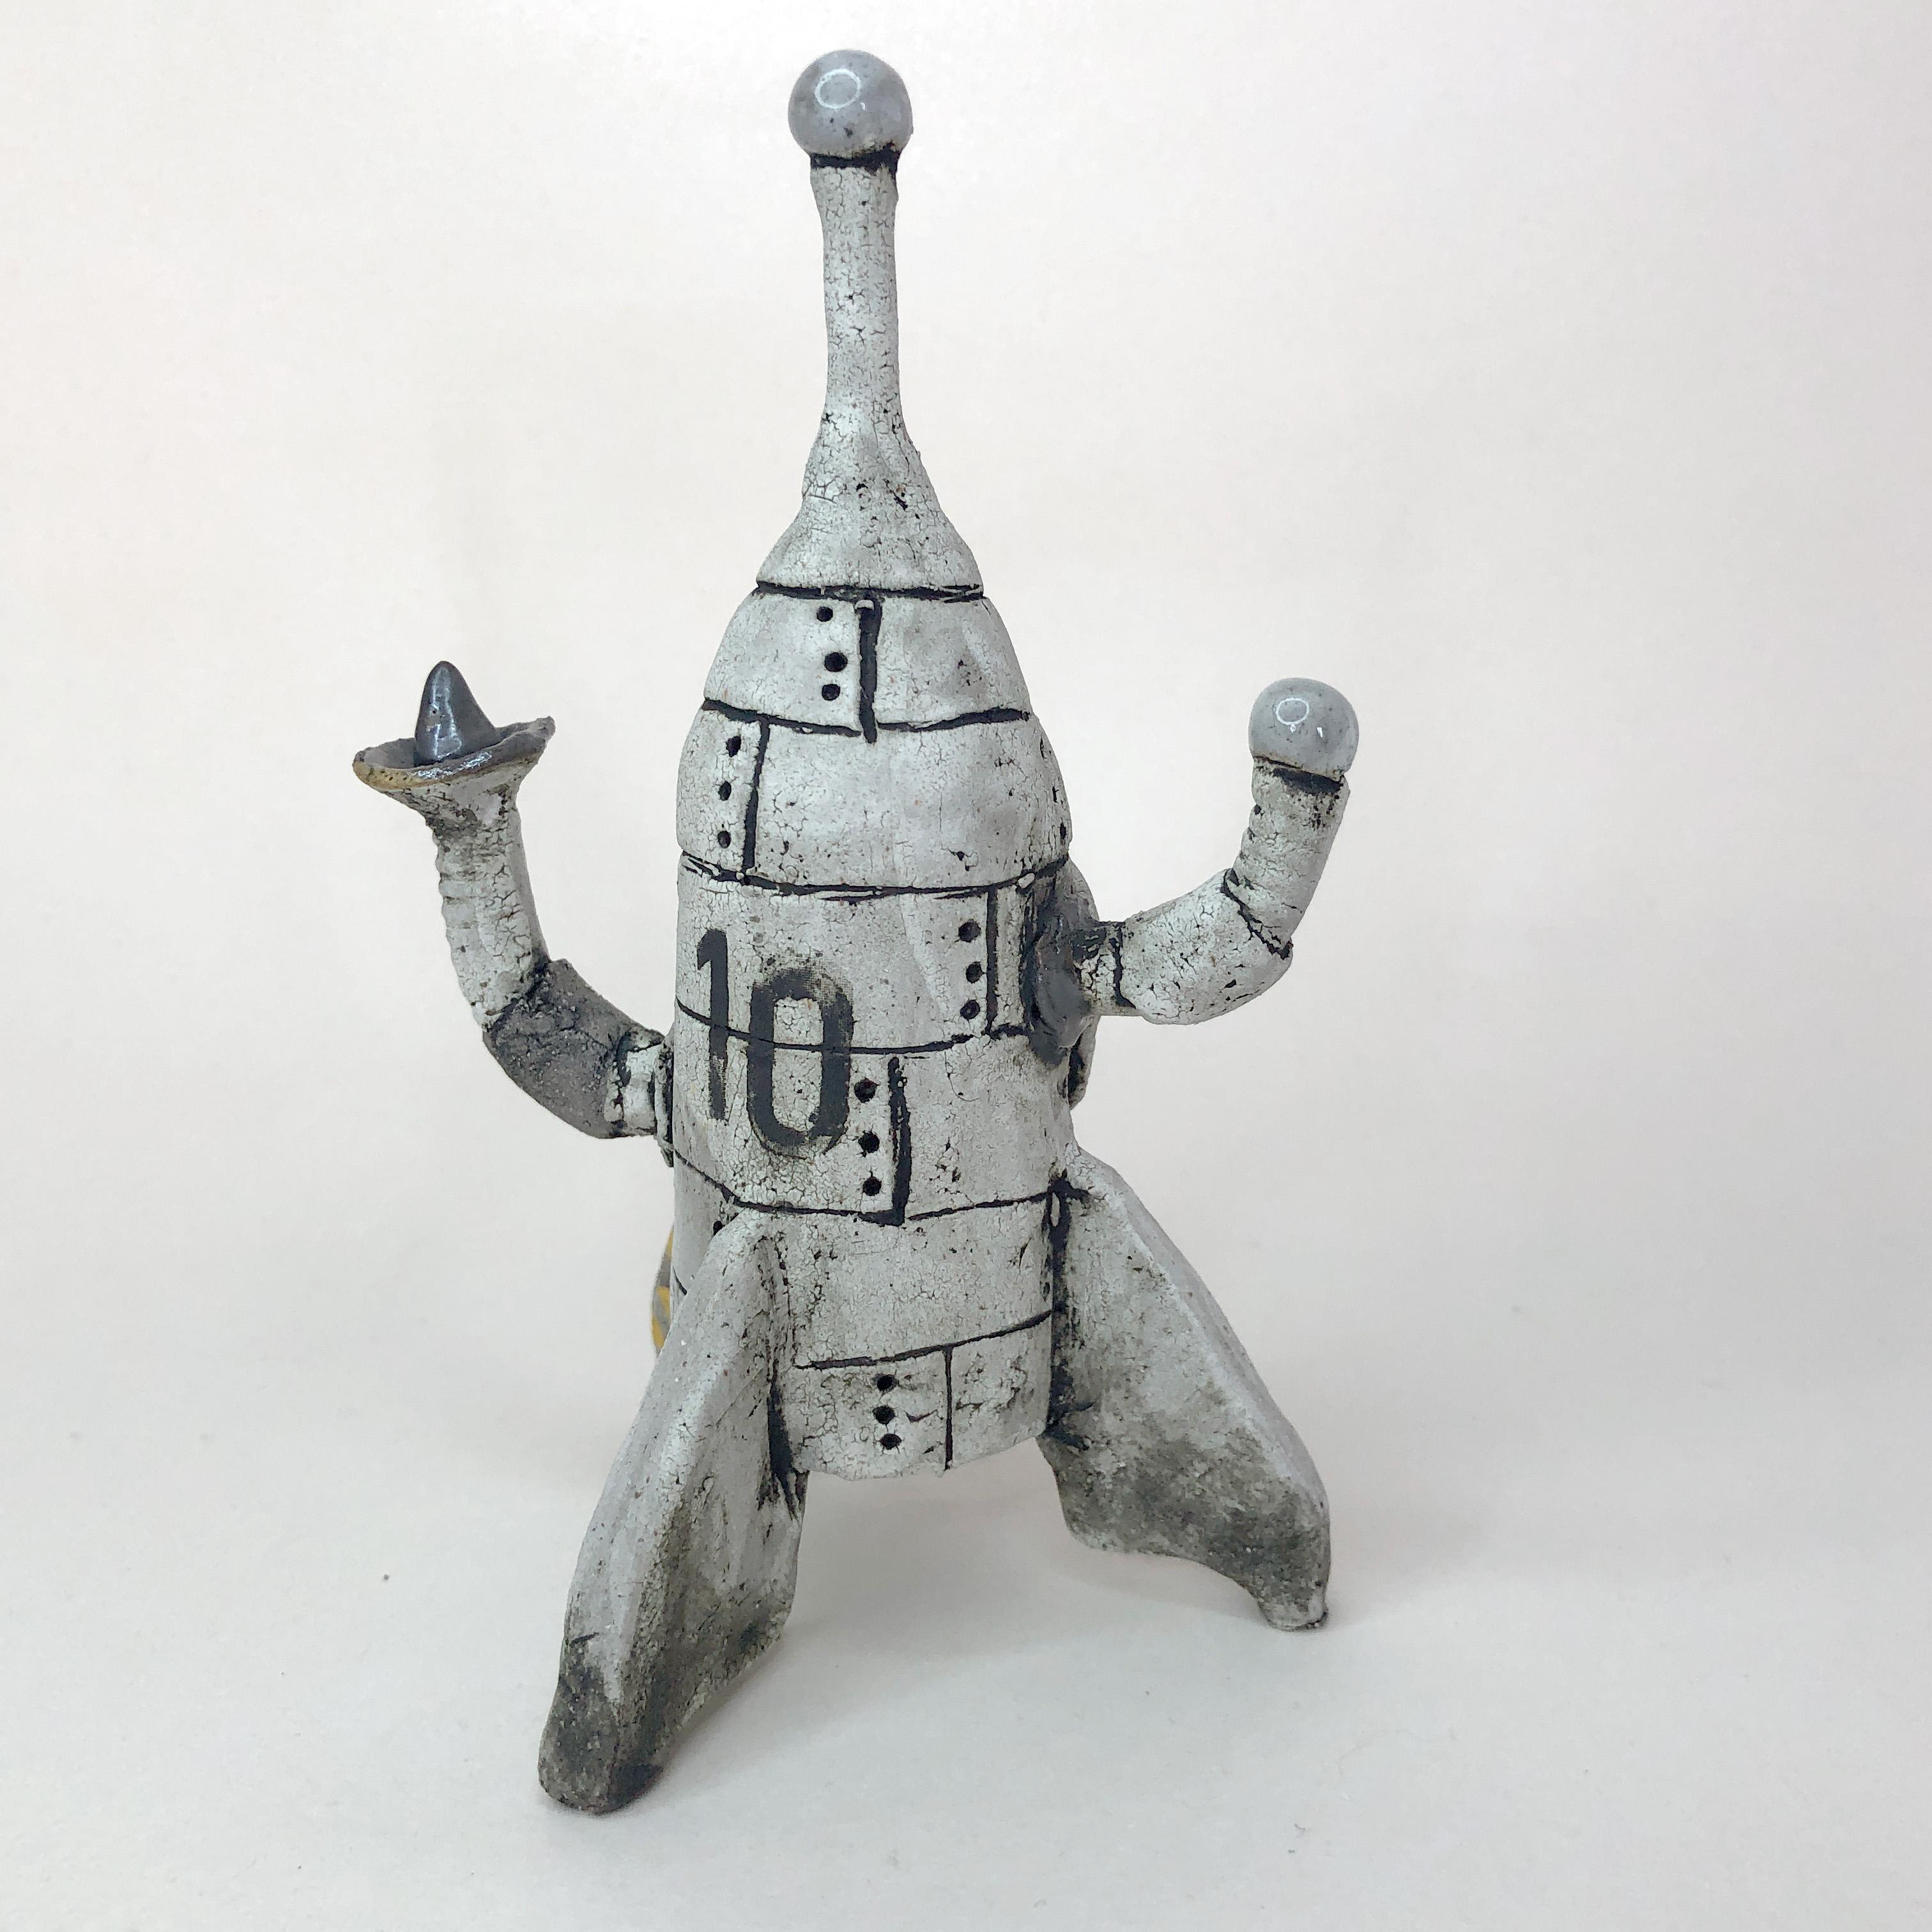 Presenting a stoneware sculpture featuring a petite rocket, adorned with a prominent number 10 and striking white paint with contrasting orange stripes. The sculpture's design exudes simplicity, reminiscent of classic cartoon aesthetics.

The grungy